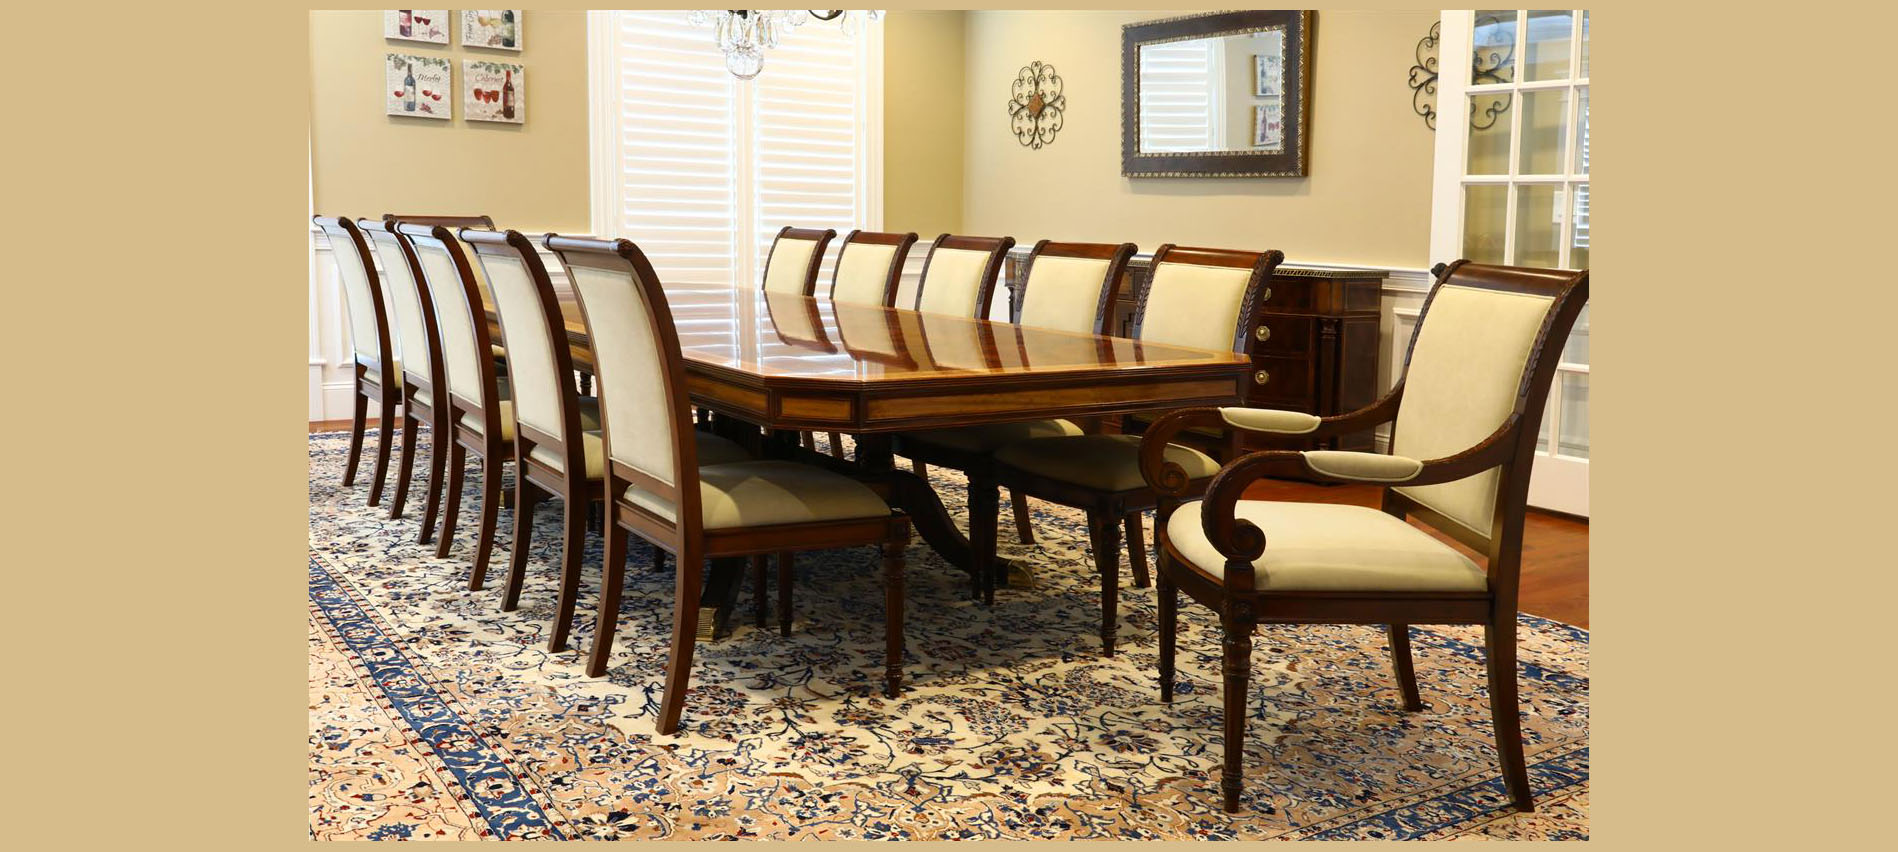 Customer Experience 4 Antiquepurveyor Com, How Long Should A Dining Room Table Be To Seat 12